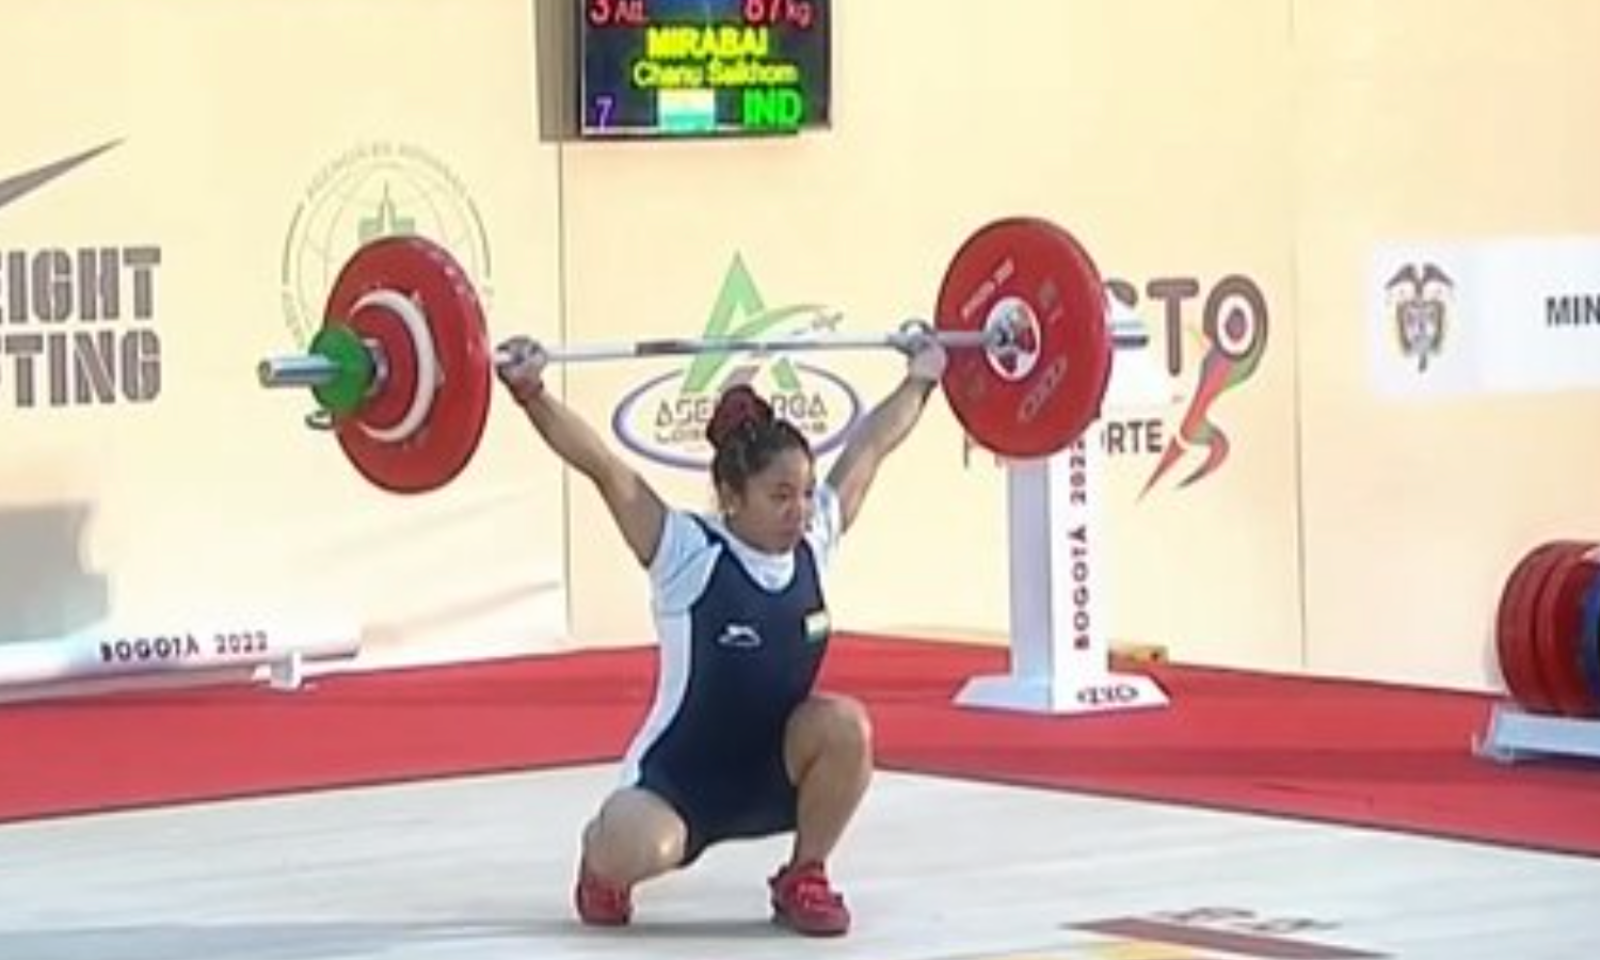 How Mirabai Chanu showed true grit to perform spectacular snatch save